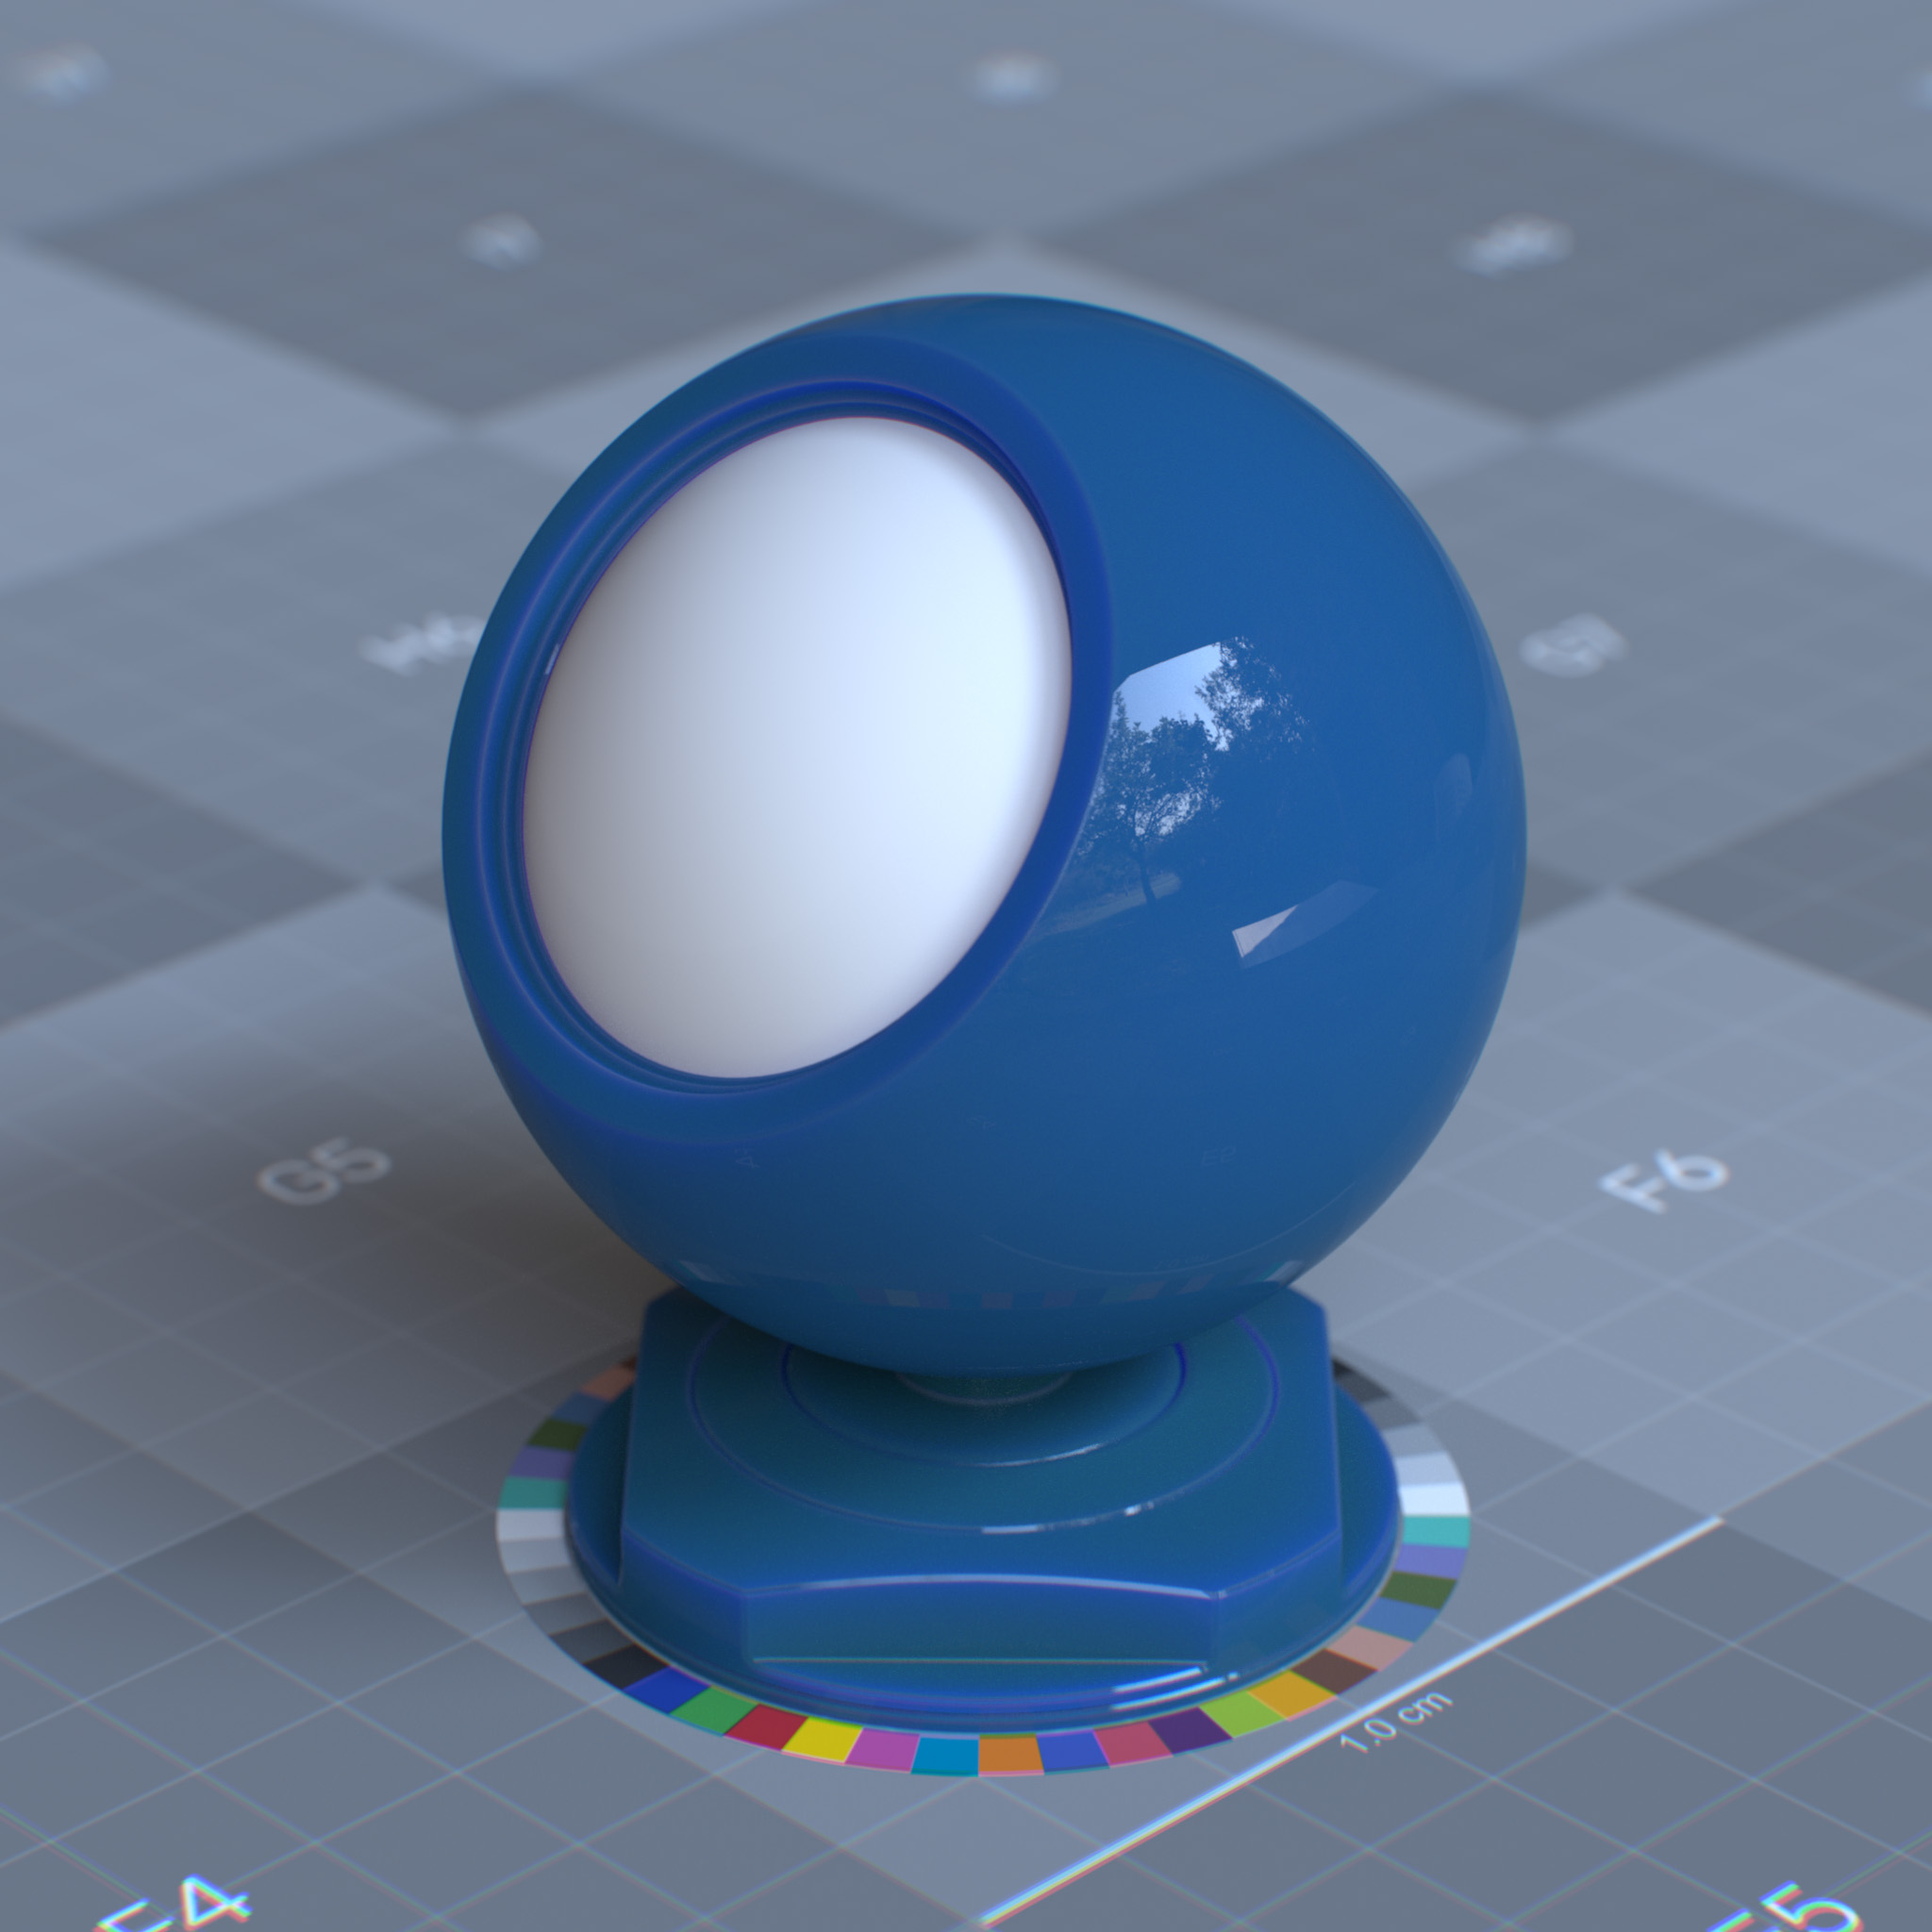 rtx_material_omnisurfacebase_specular_reflection_weight_0p5